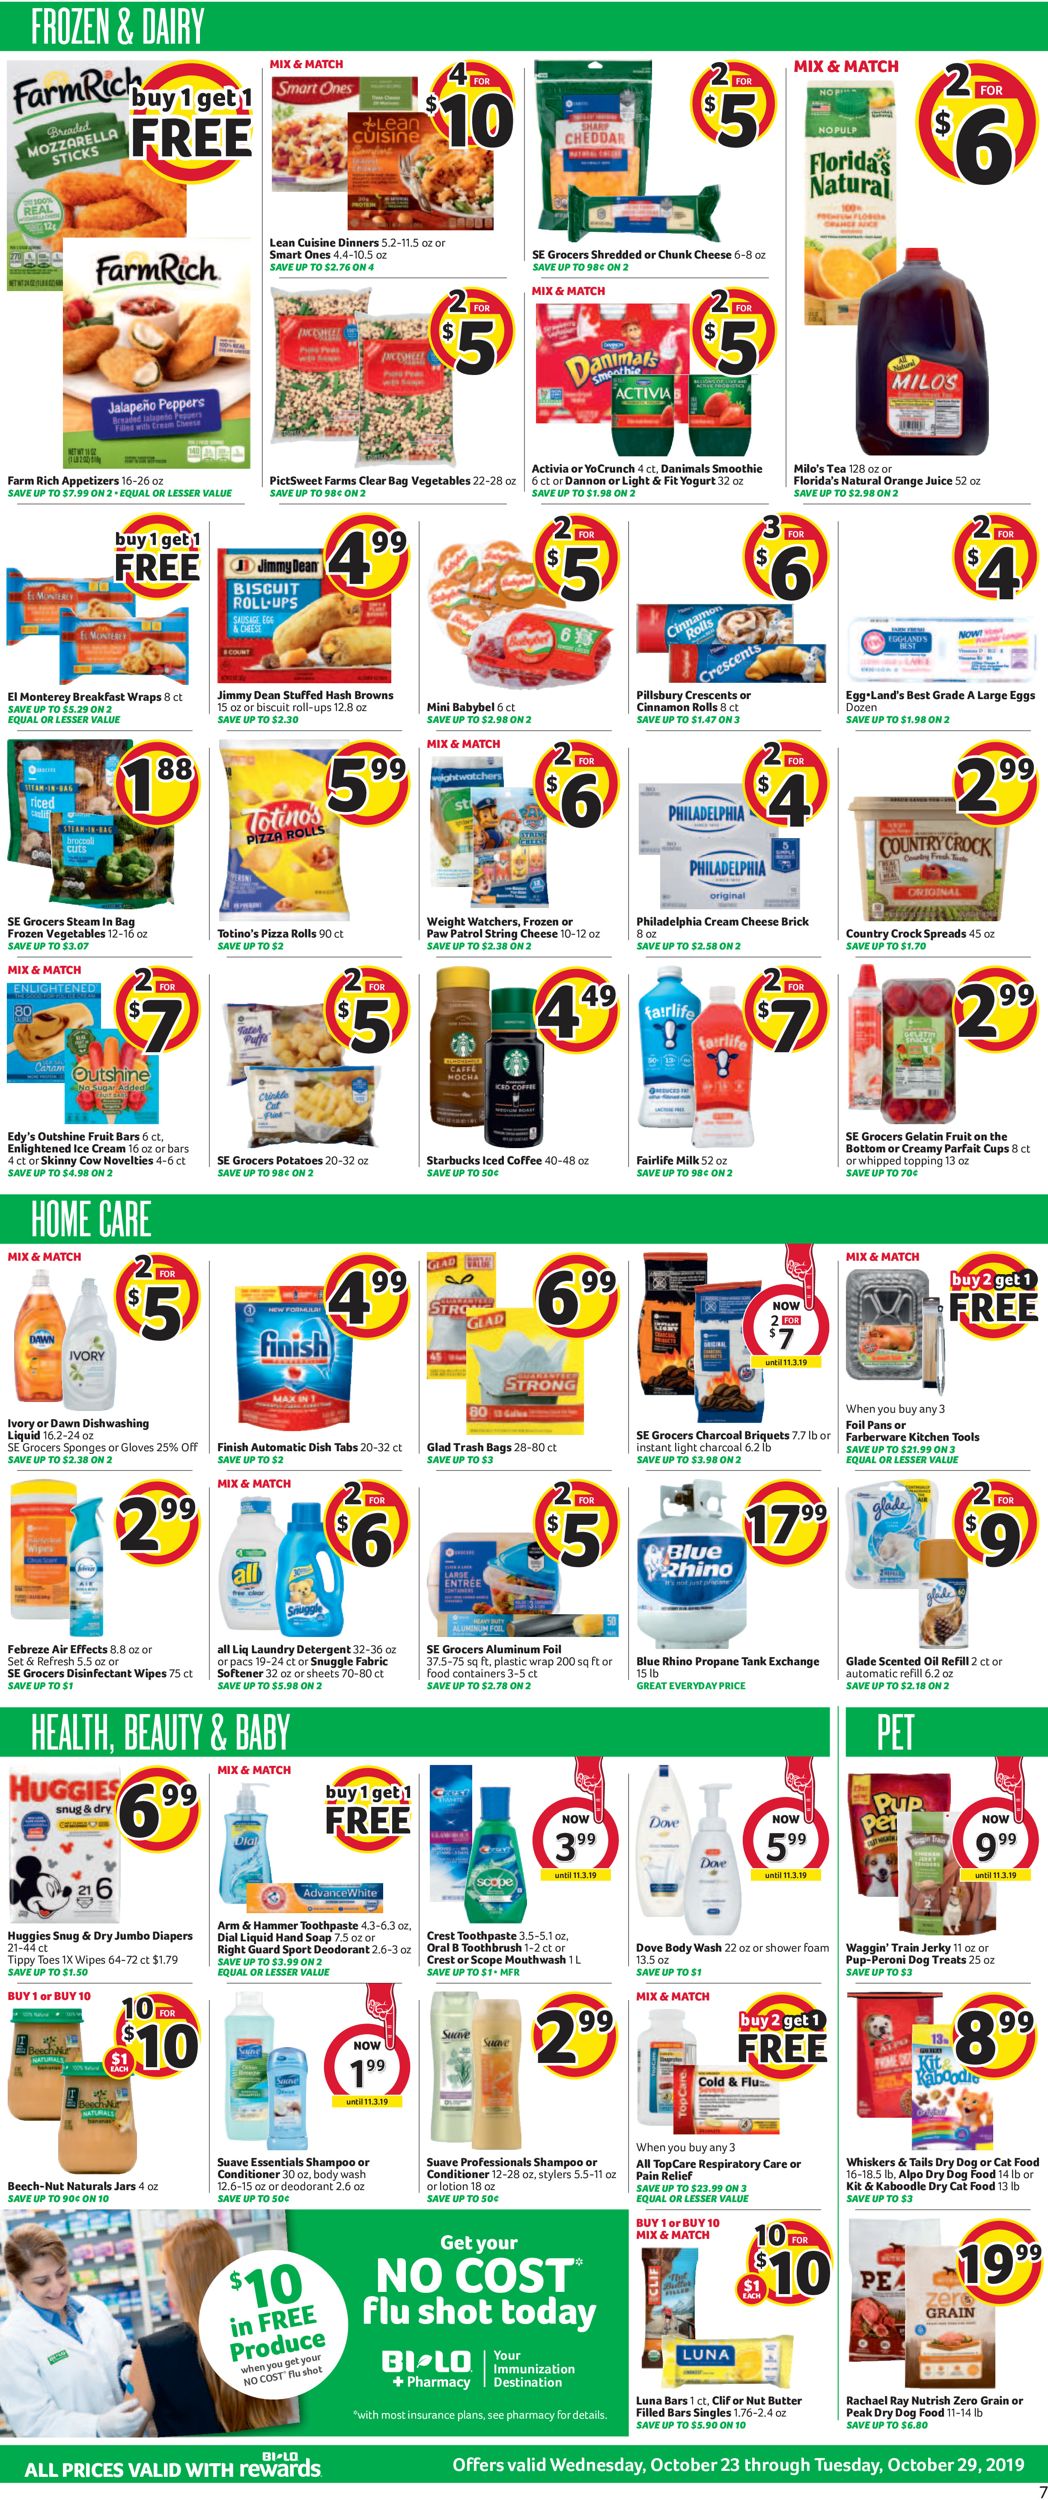 BI-LO Current weekly ad 10/23 - 10/29/2019 [7] - frequent-ads.com